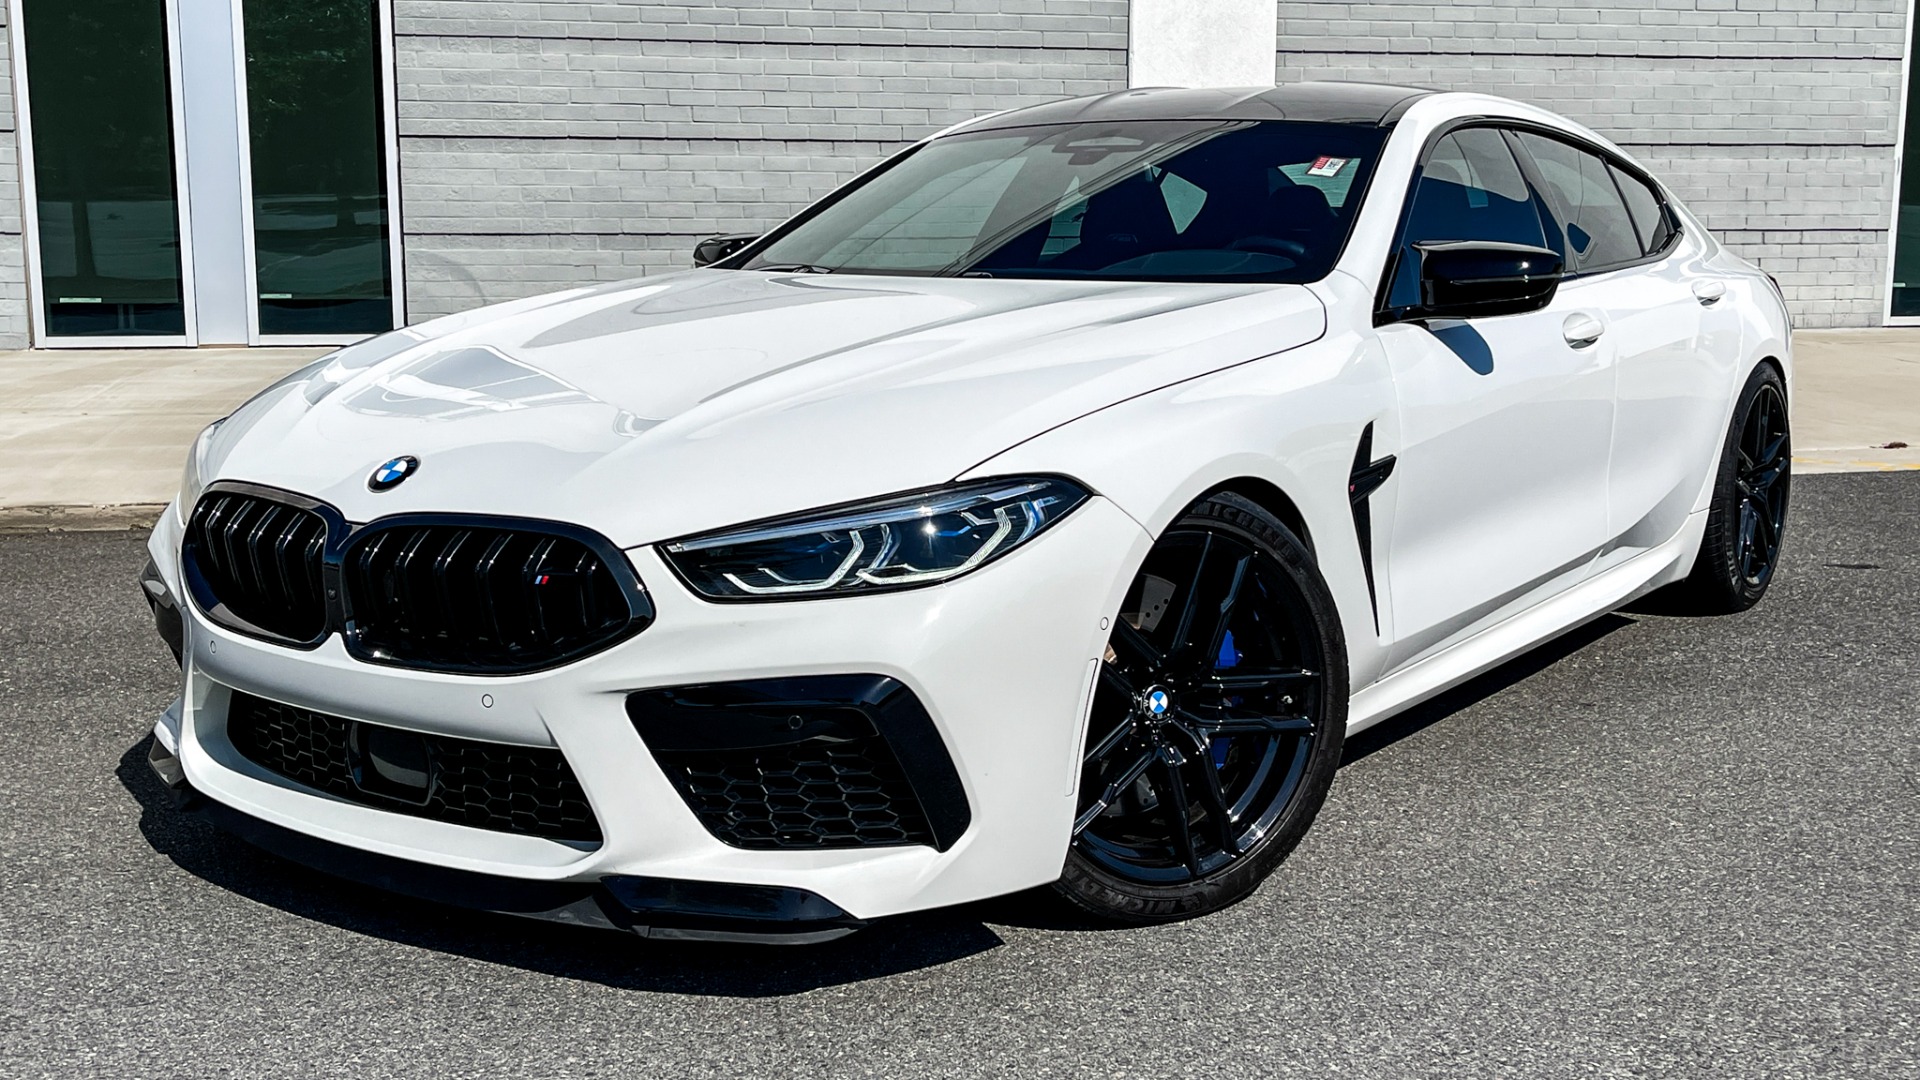 Used 2020 BMW M8 COMPETITON / TWIN TURBO / KW V3 SUSPENSION / FRONT LIFT / PPF / CERAMIC COA for sale $114,999 at Formula Imports in Charlotte NC 28227 1